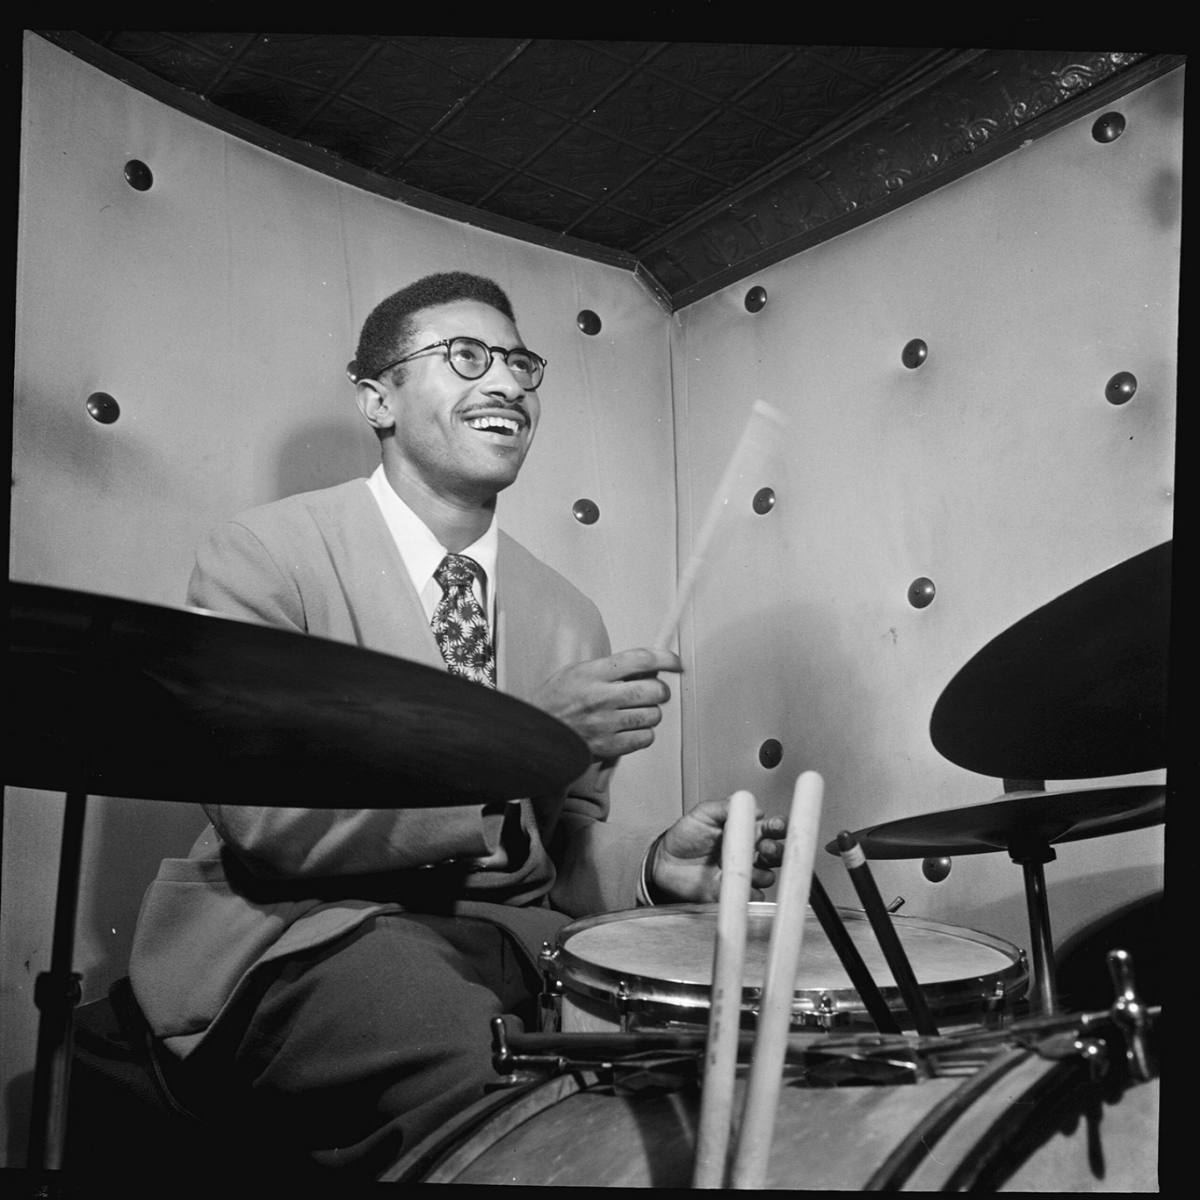 Max Roach at the drums